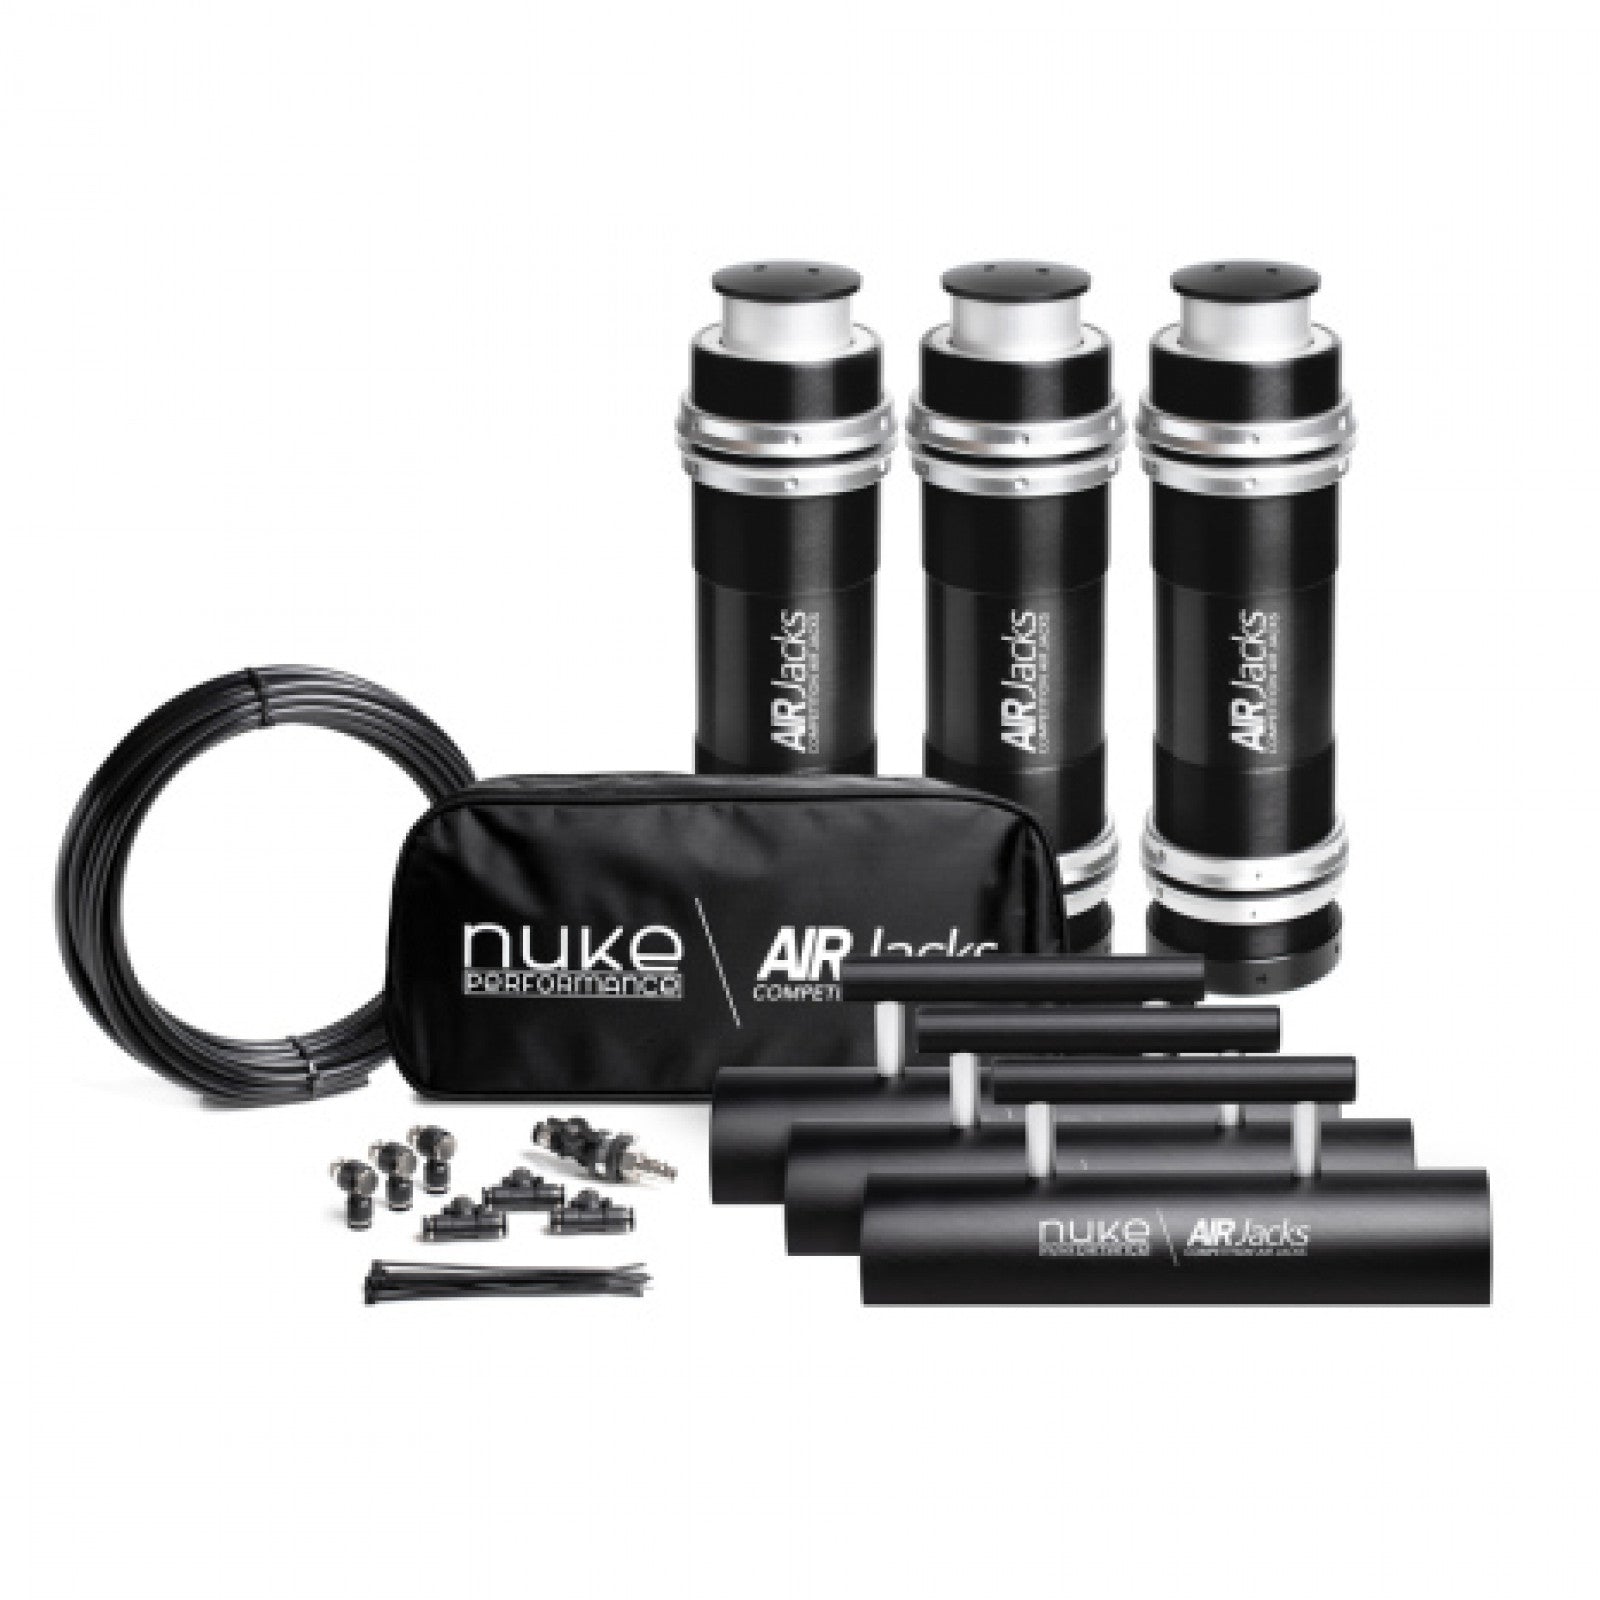 Nuke Performance Air Jack 90 Competition Juego completo 3 piezas, 8 BAR / 120 PSI